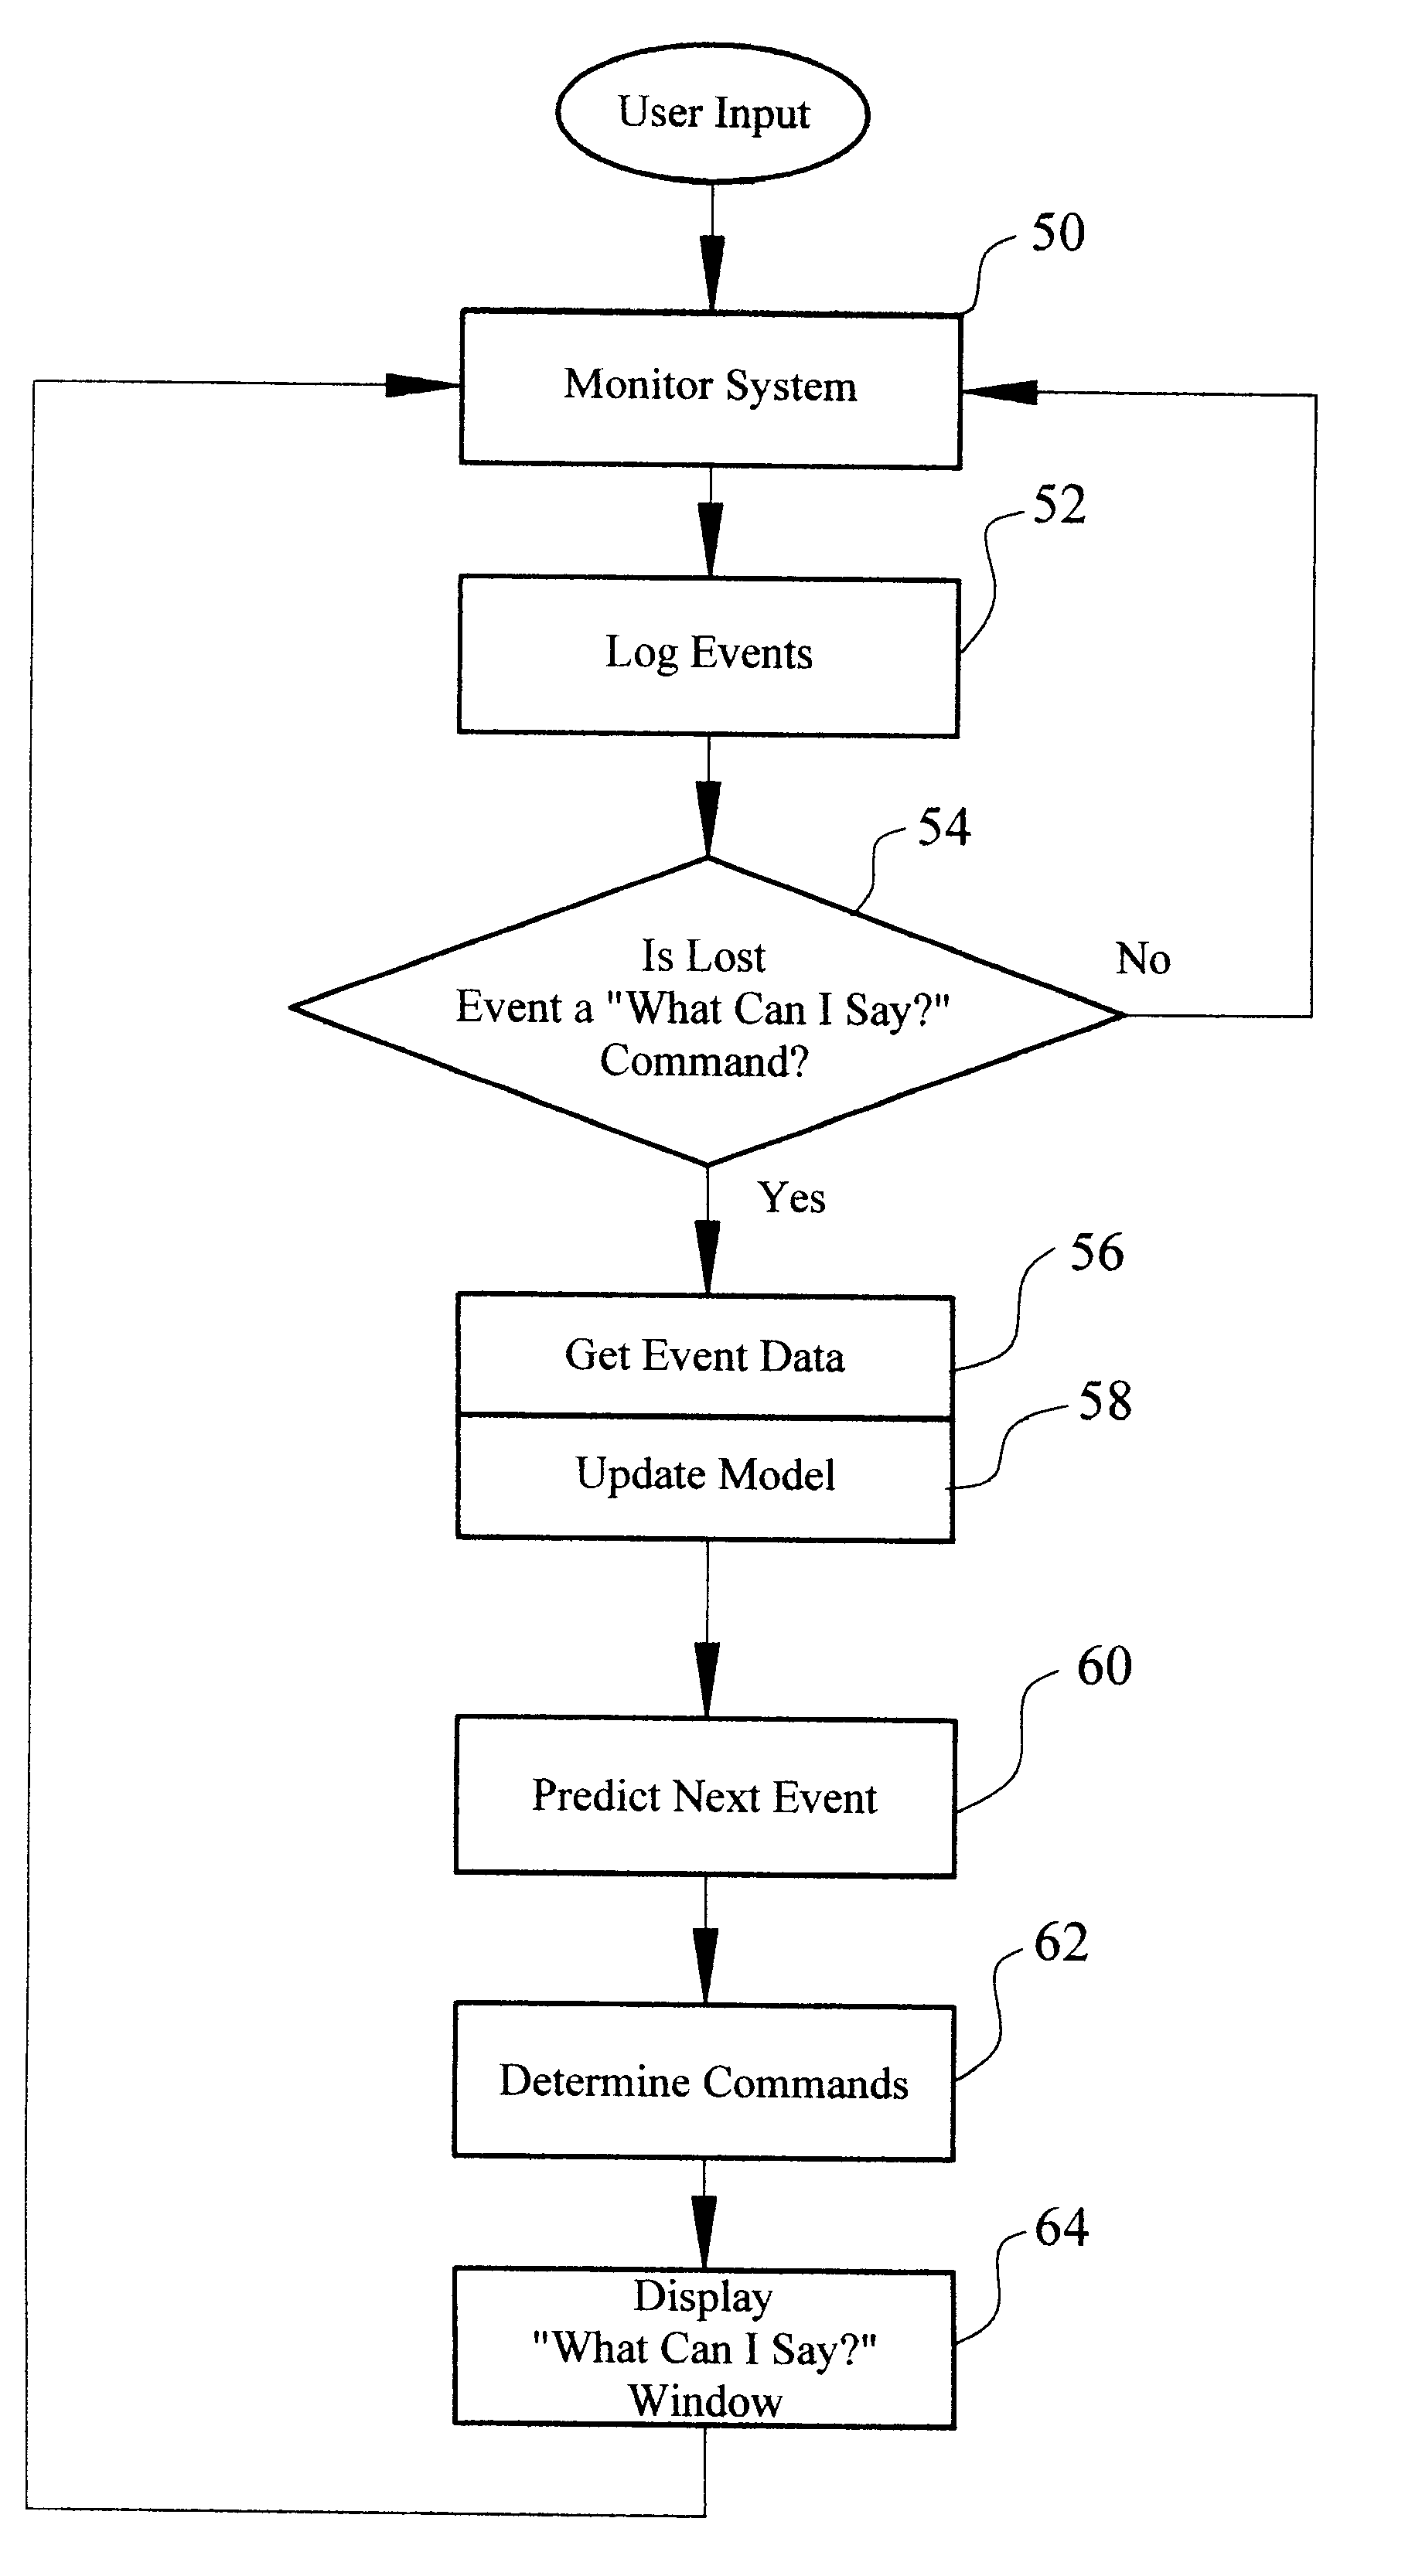 Method and apparatus for providing an event-based "What-Can-I-Say?" window